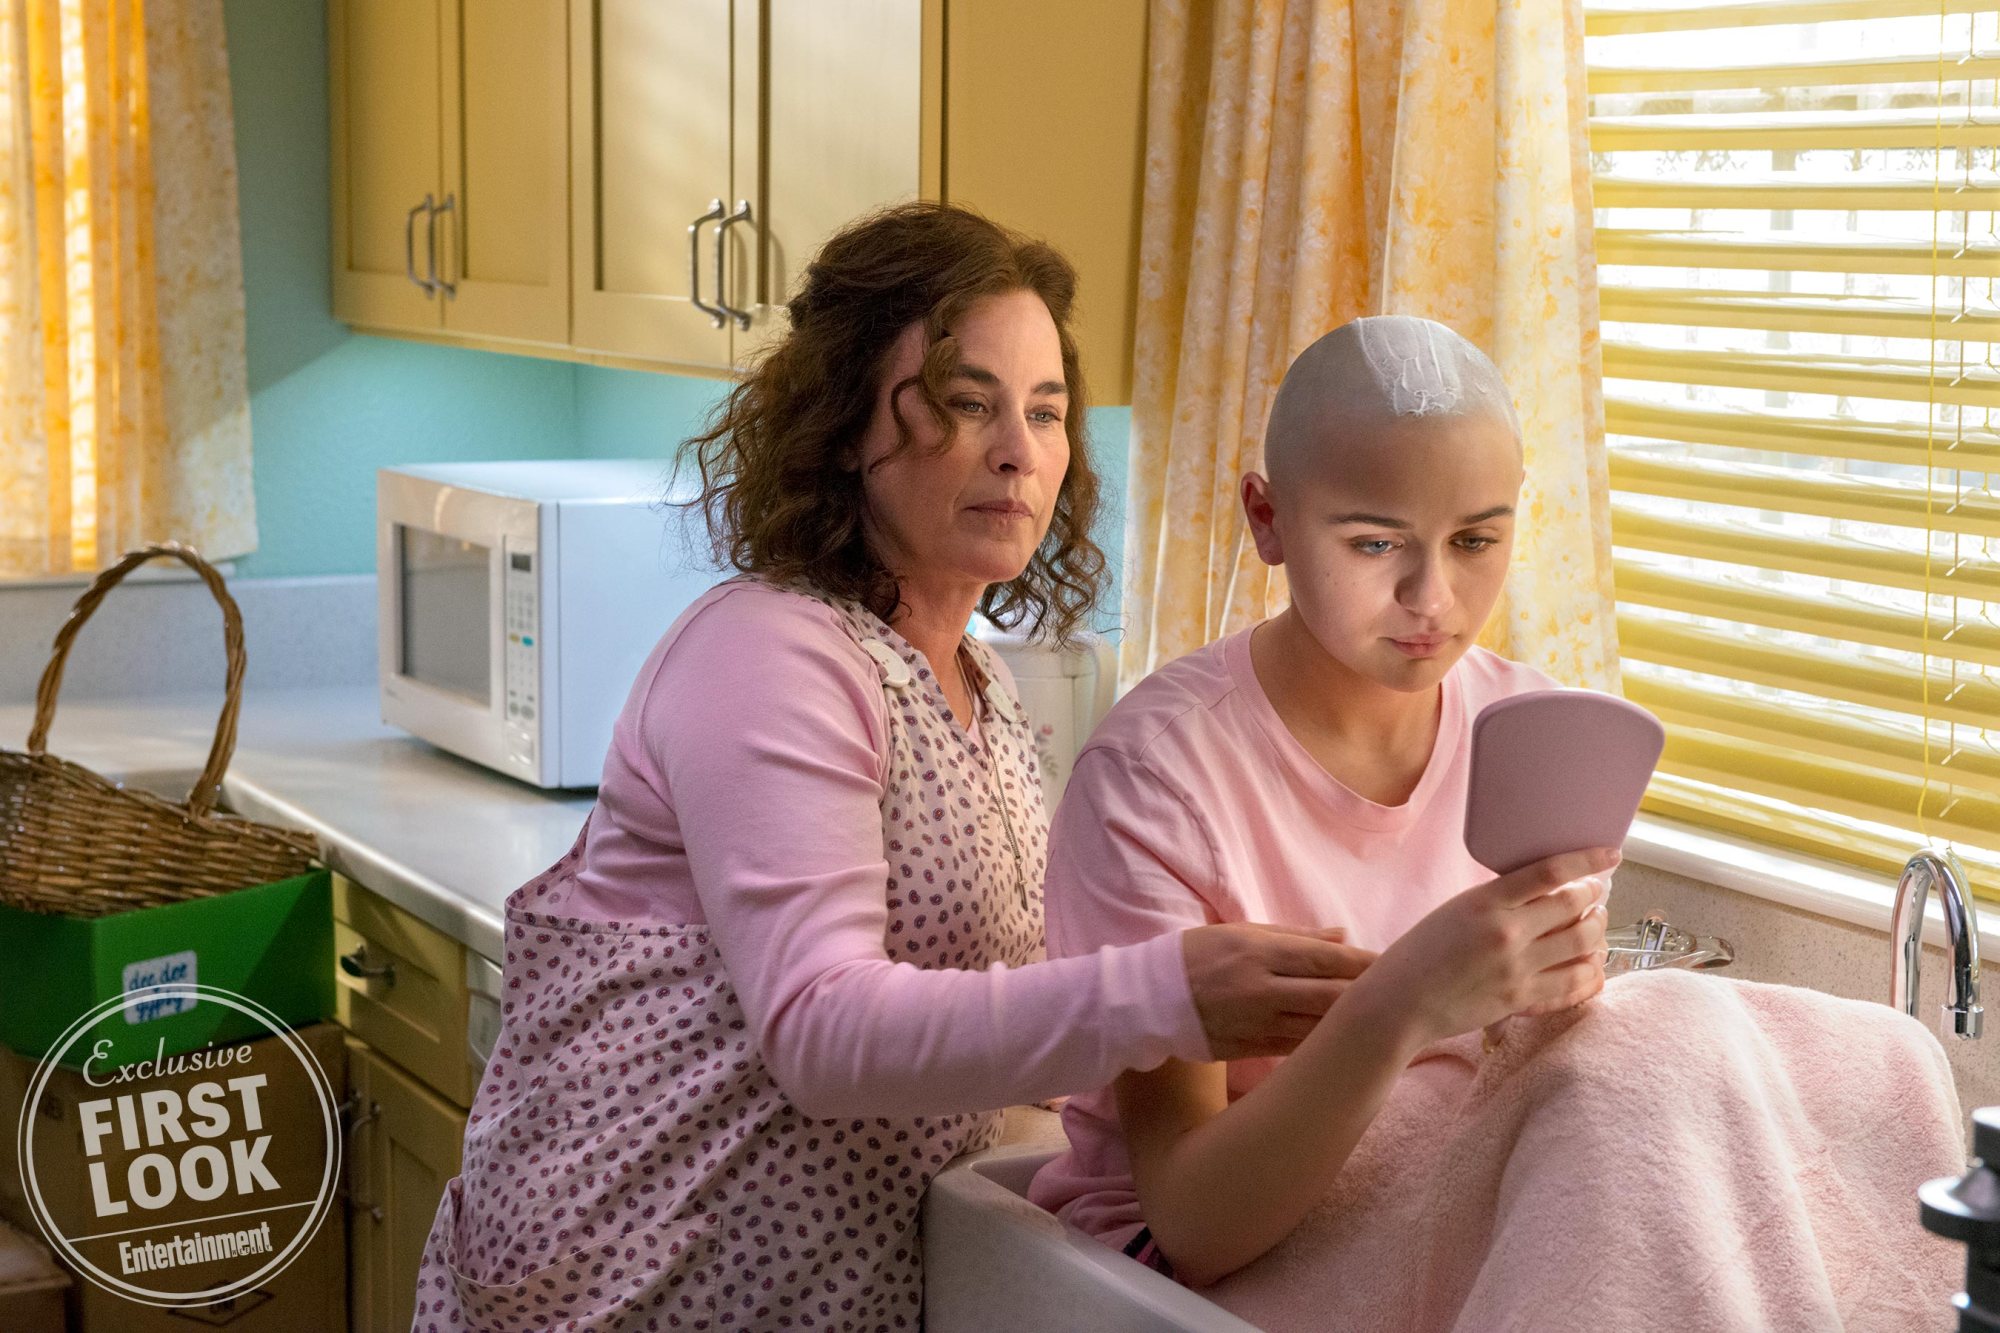 The Act Patricia Arquette, Joey King